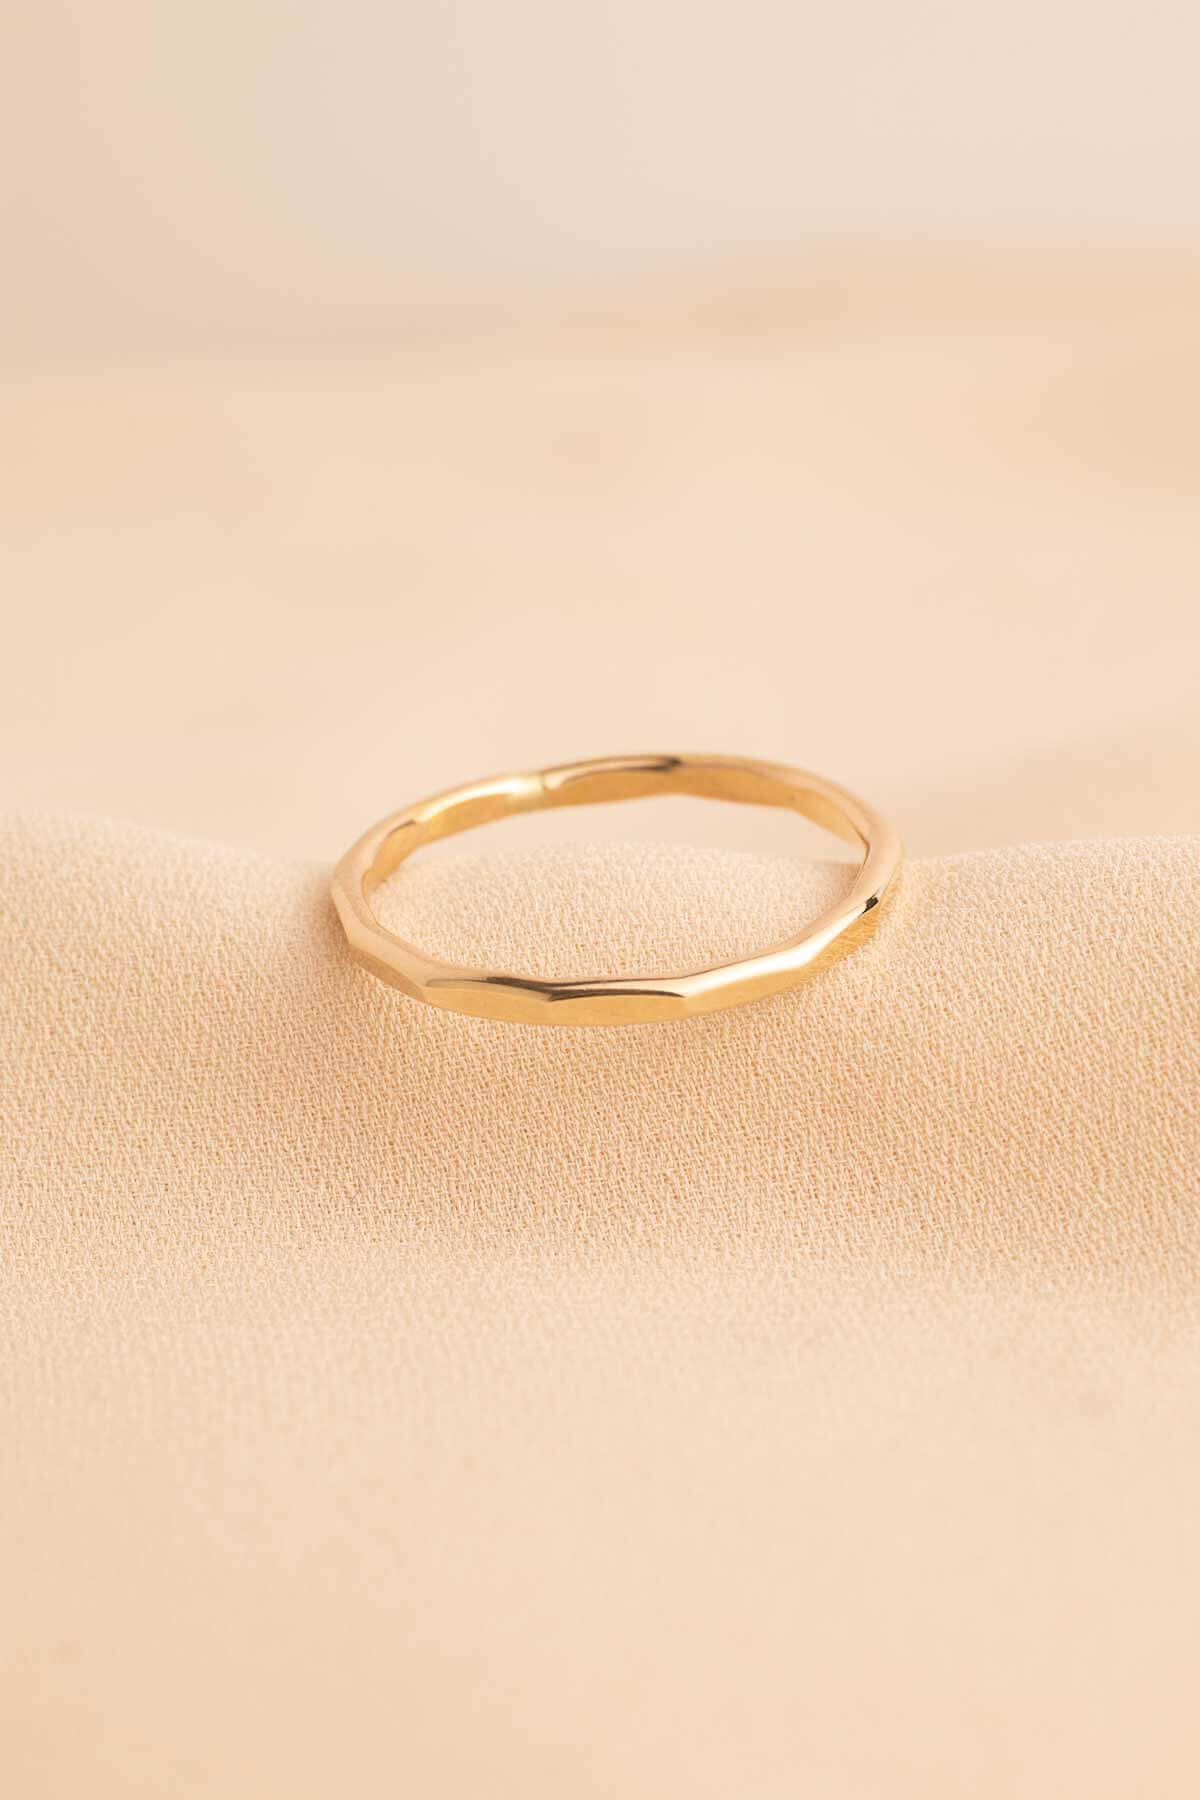 Ashby - Dainty Faceted Ring